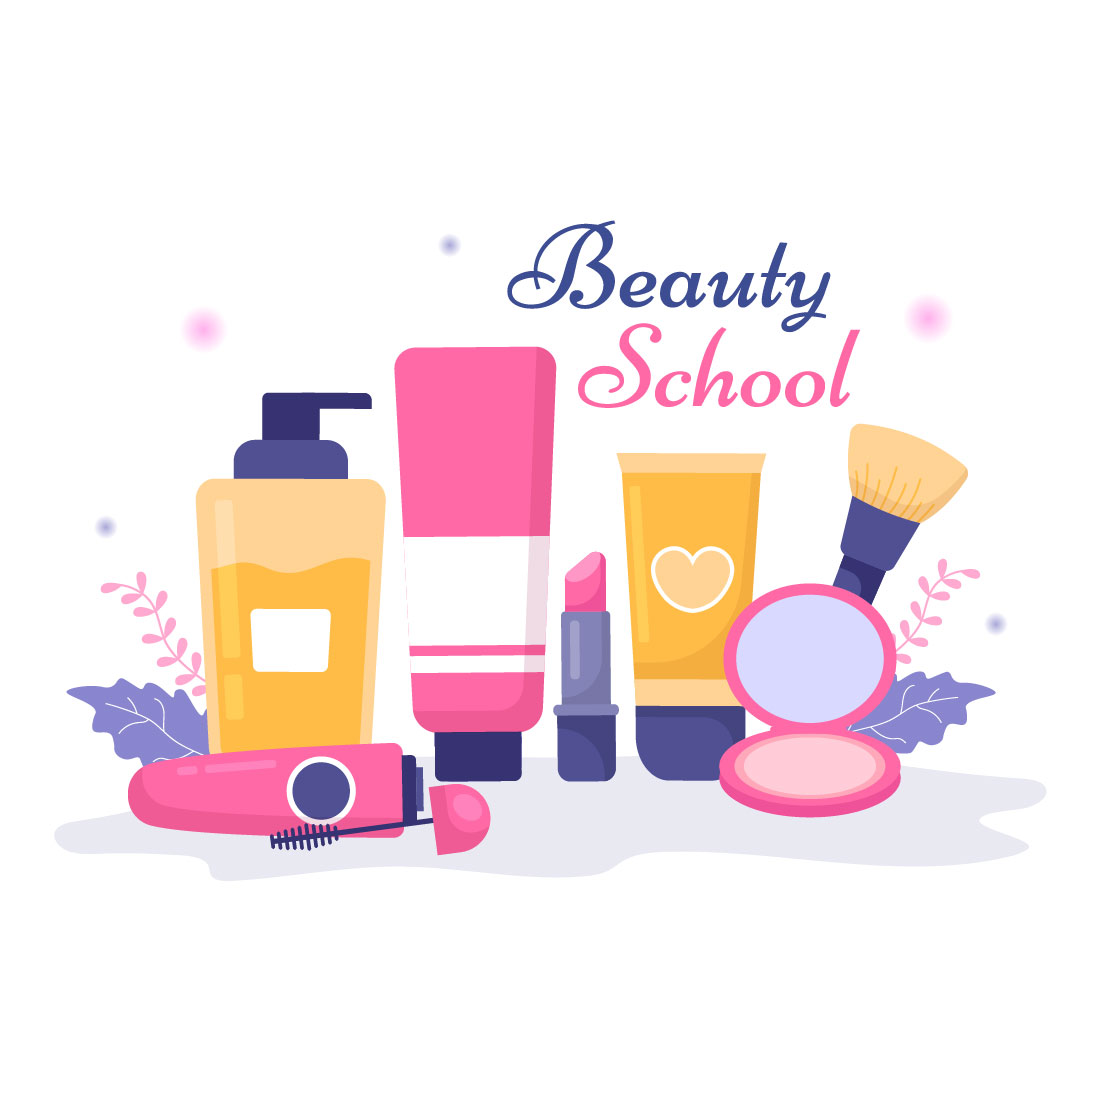 Colorful image with various cosmetics and creams.